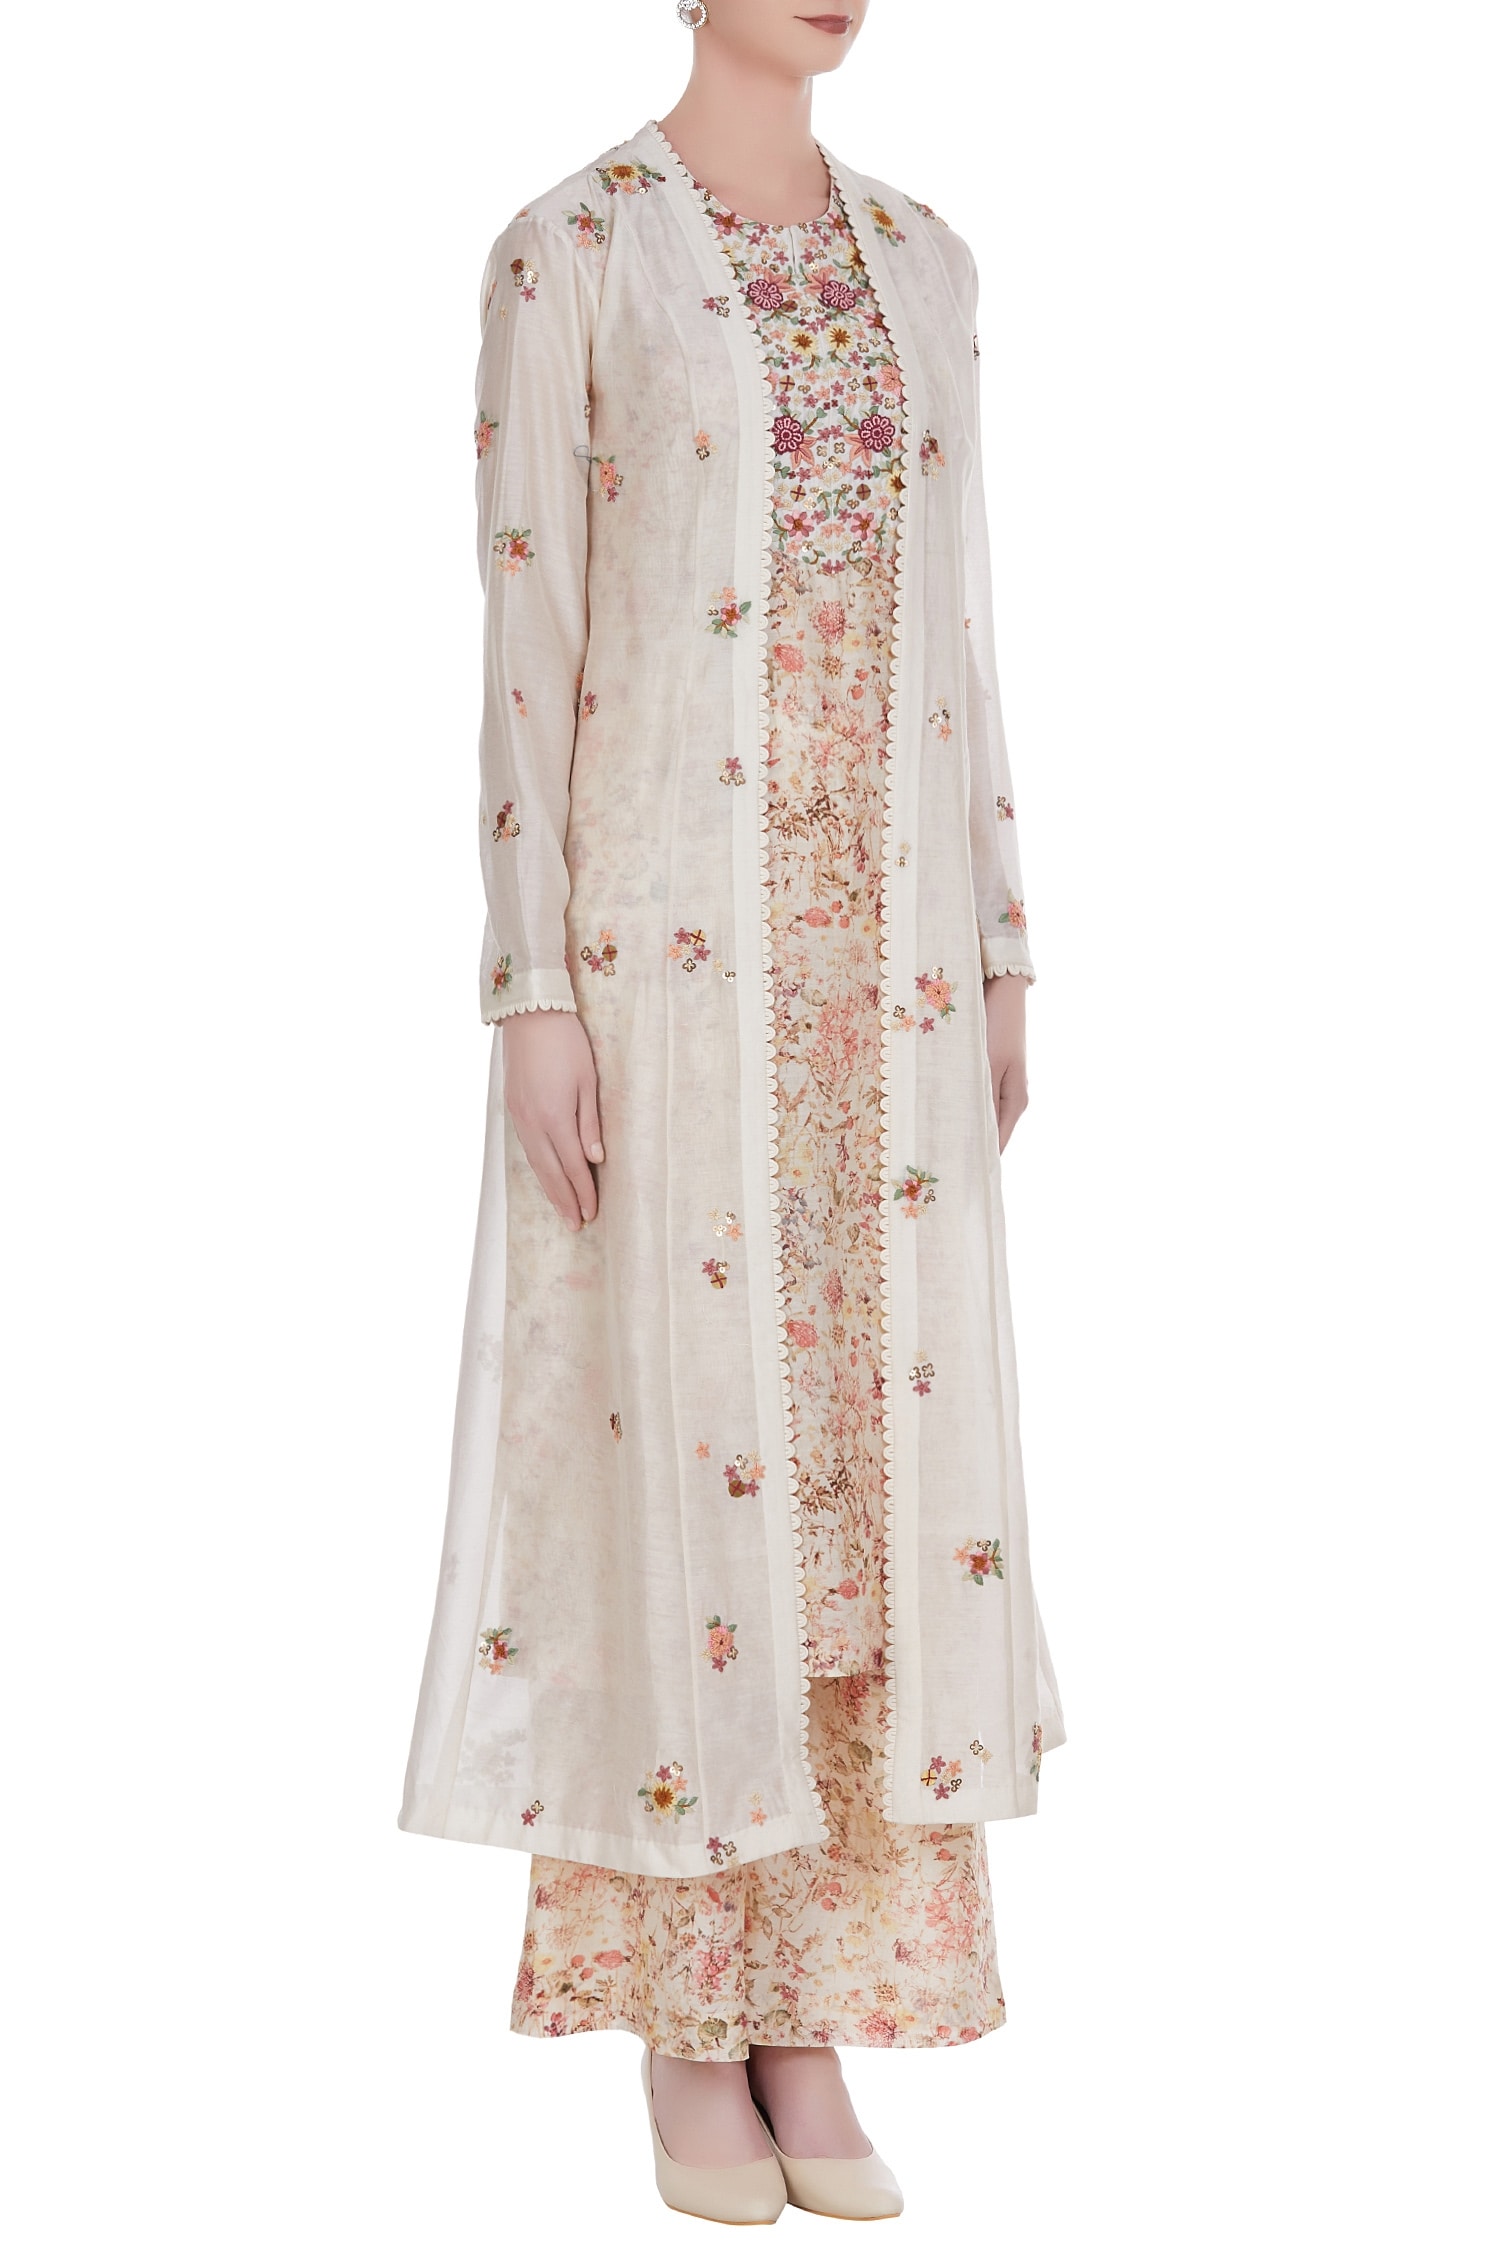 Buy Petticoat Lane by Divya Beige Floral Embroidered Jacket With Inner ...